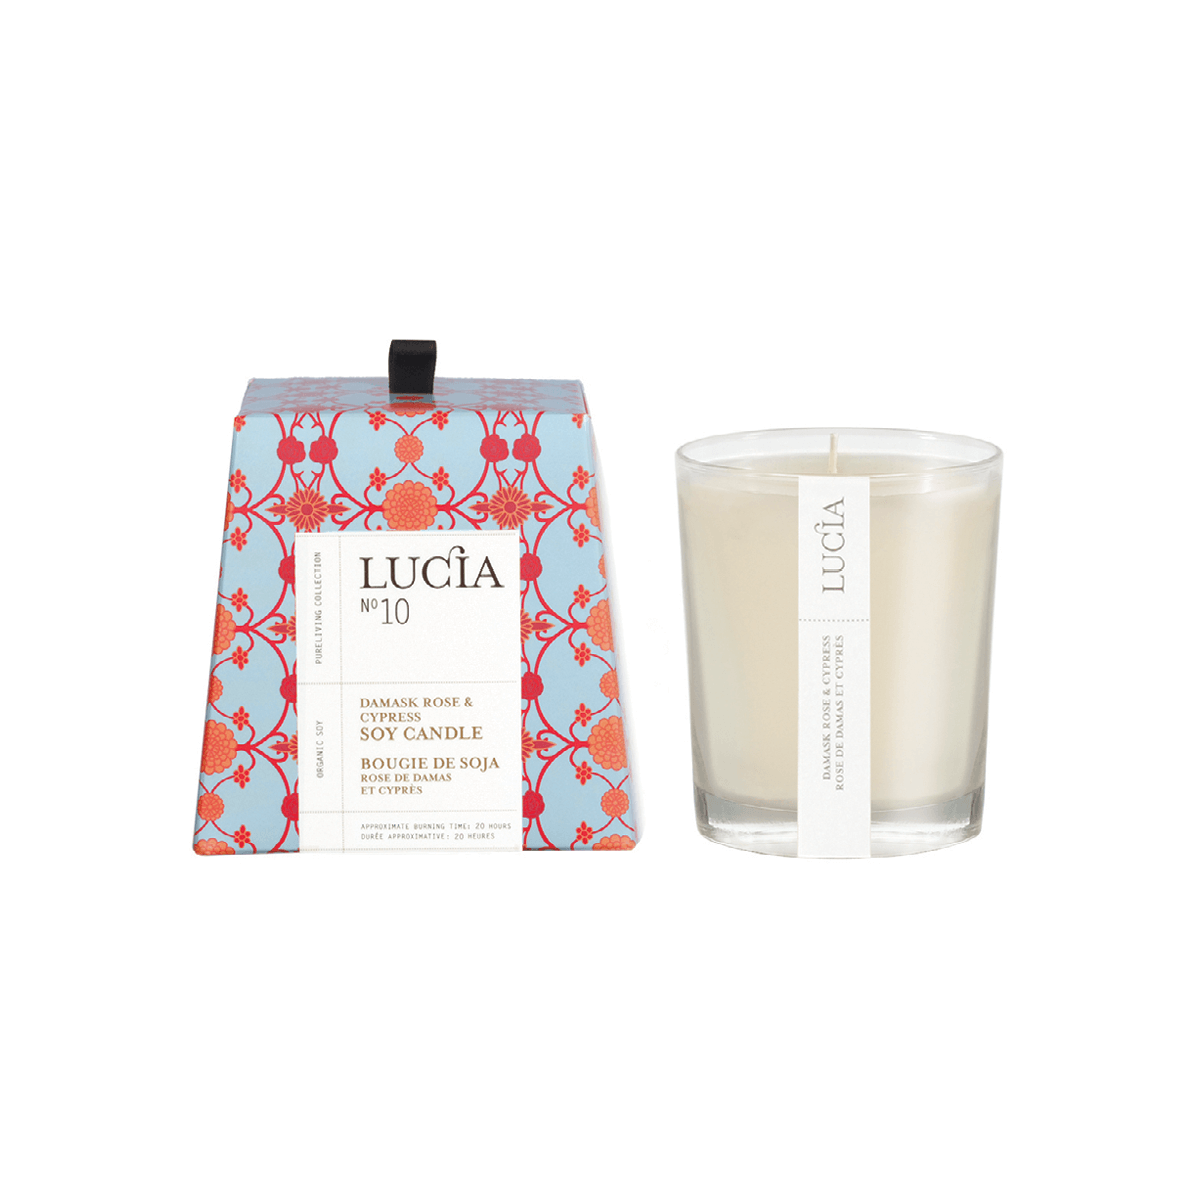 Lucia N°10 - Damask Rose & Cypress Soy Candle